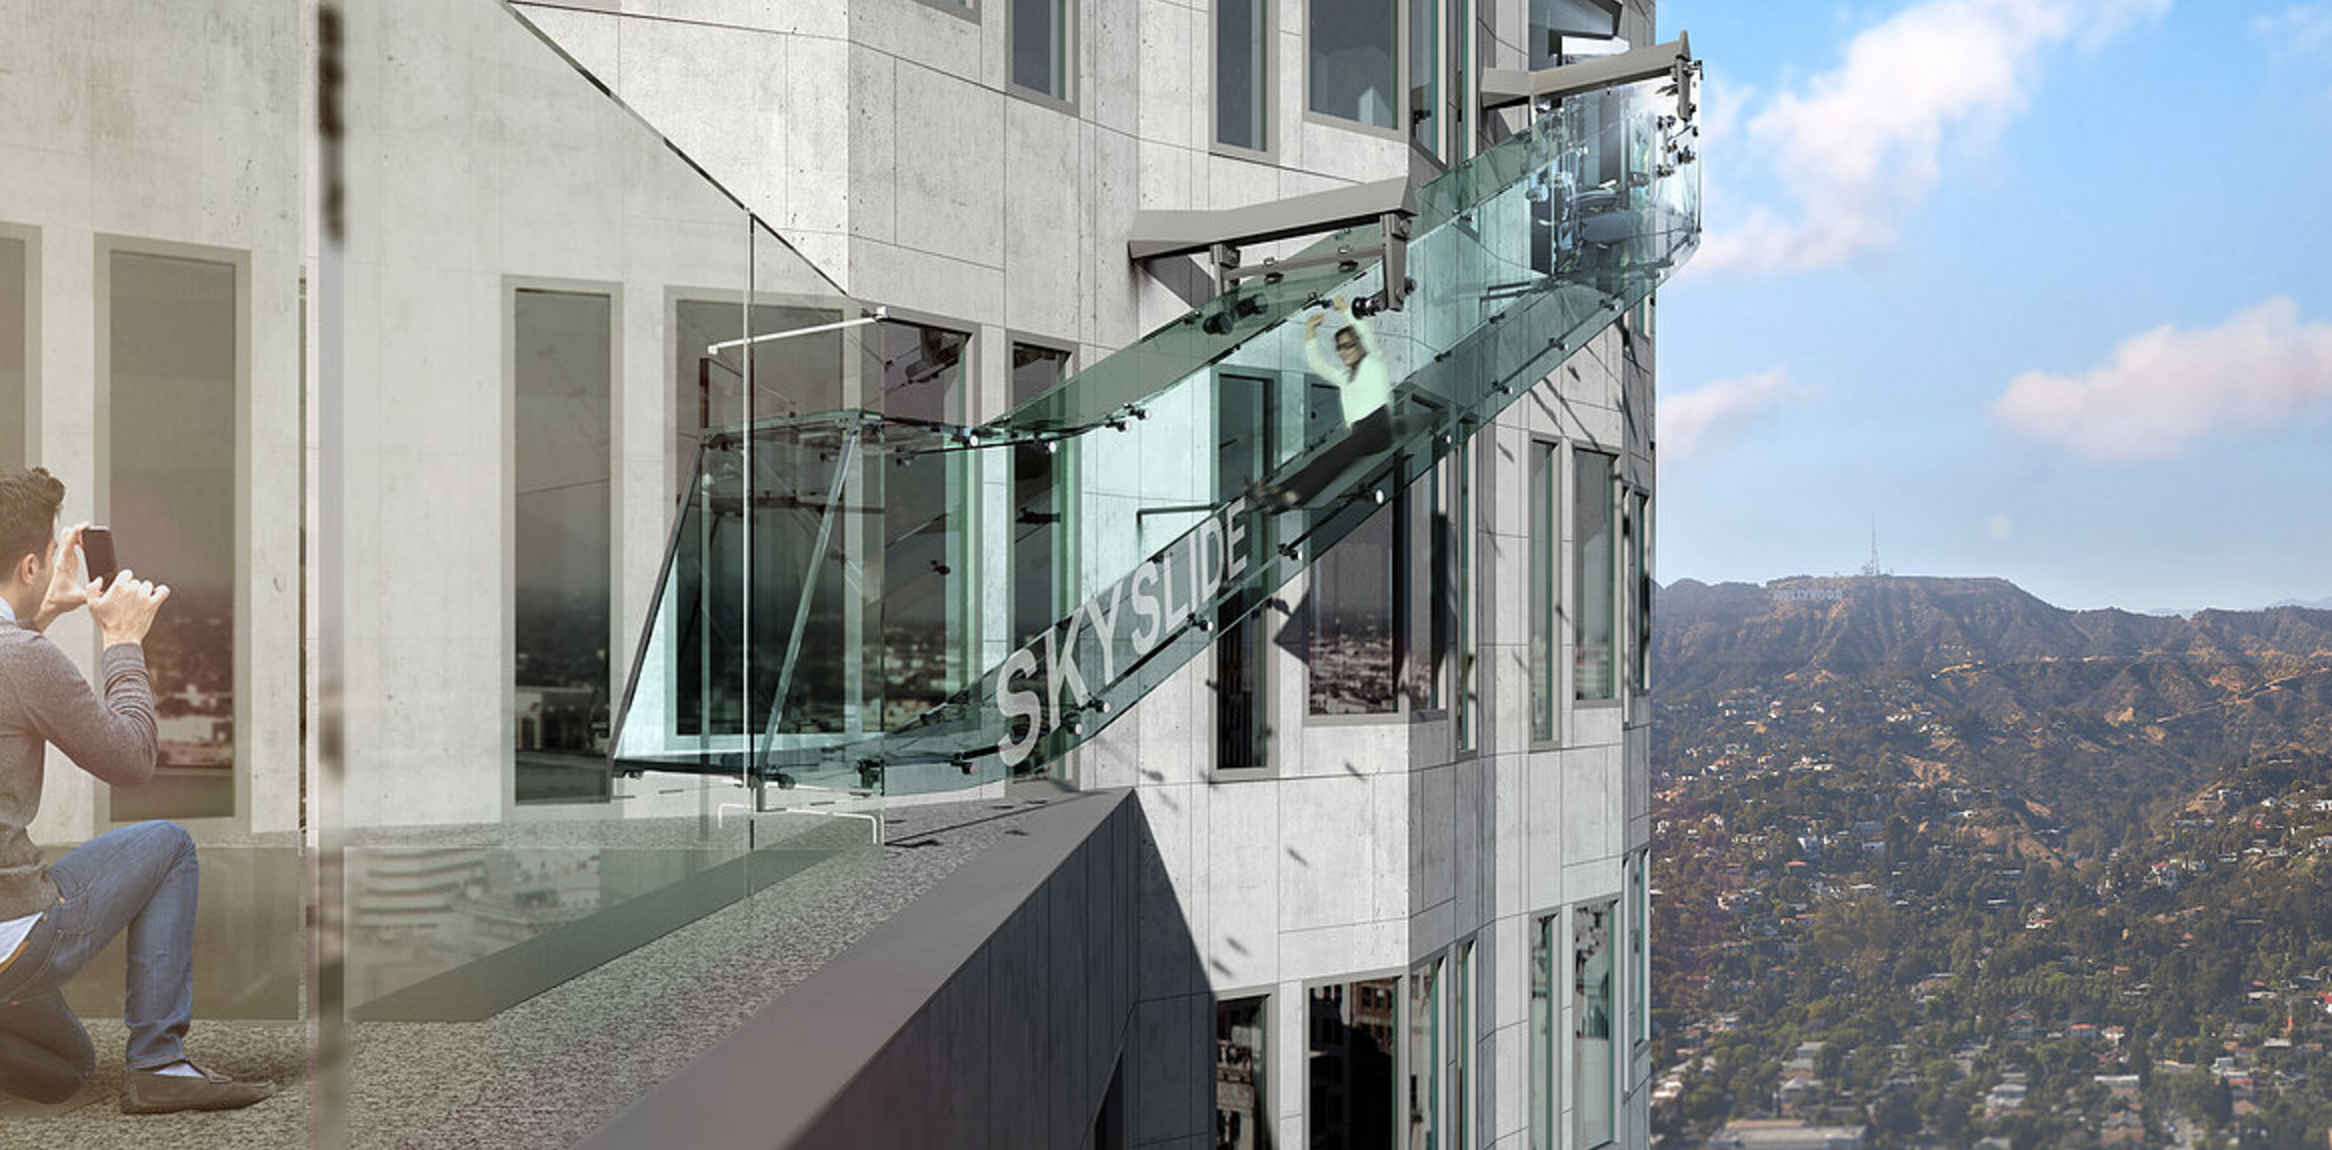 SkySlide at U.S. Bank Tower is a wild Los Angeles ride | CNN Travel